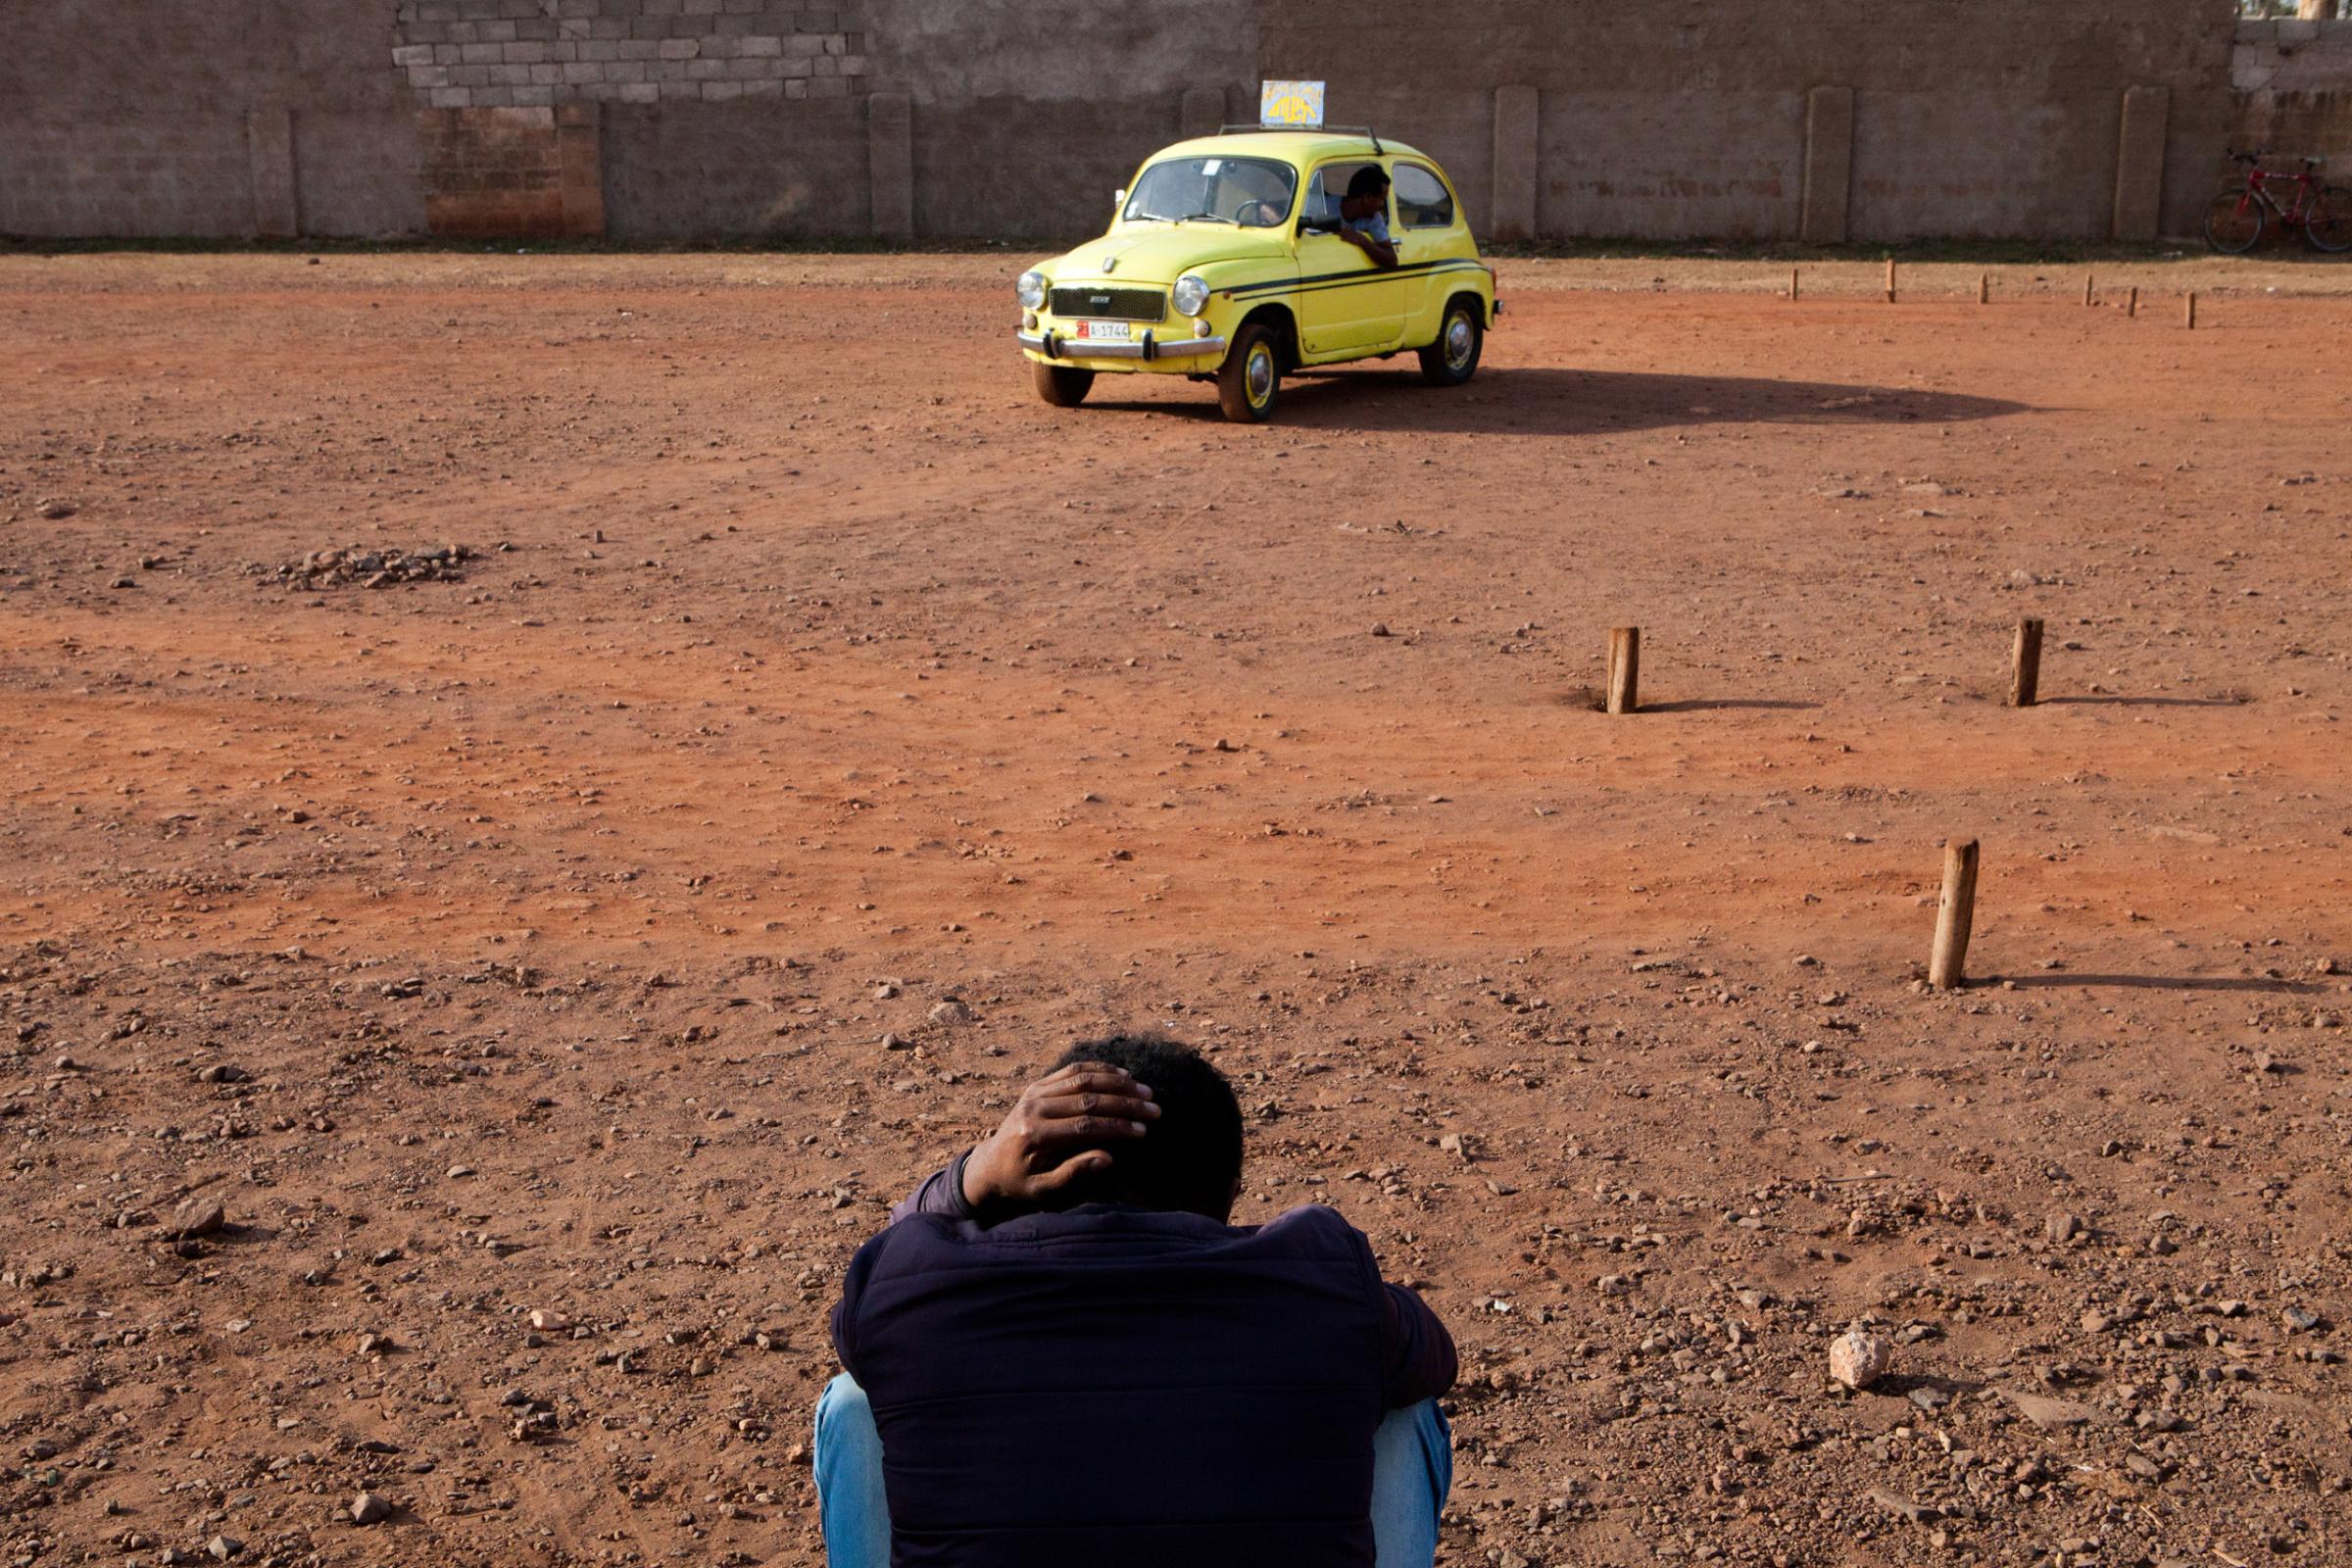 Fiat 600 used for driving test in Asmara.